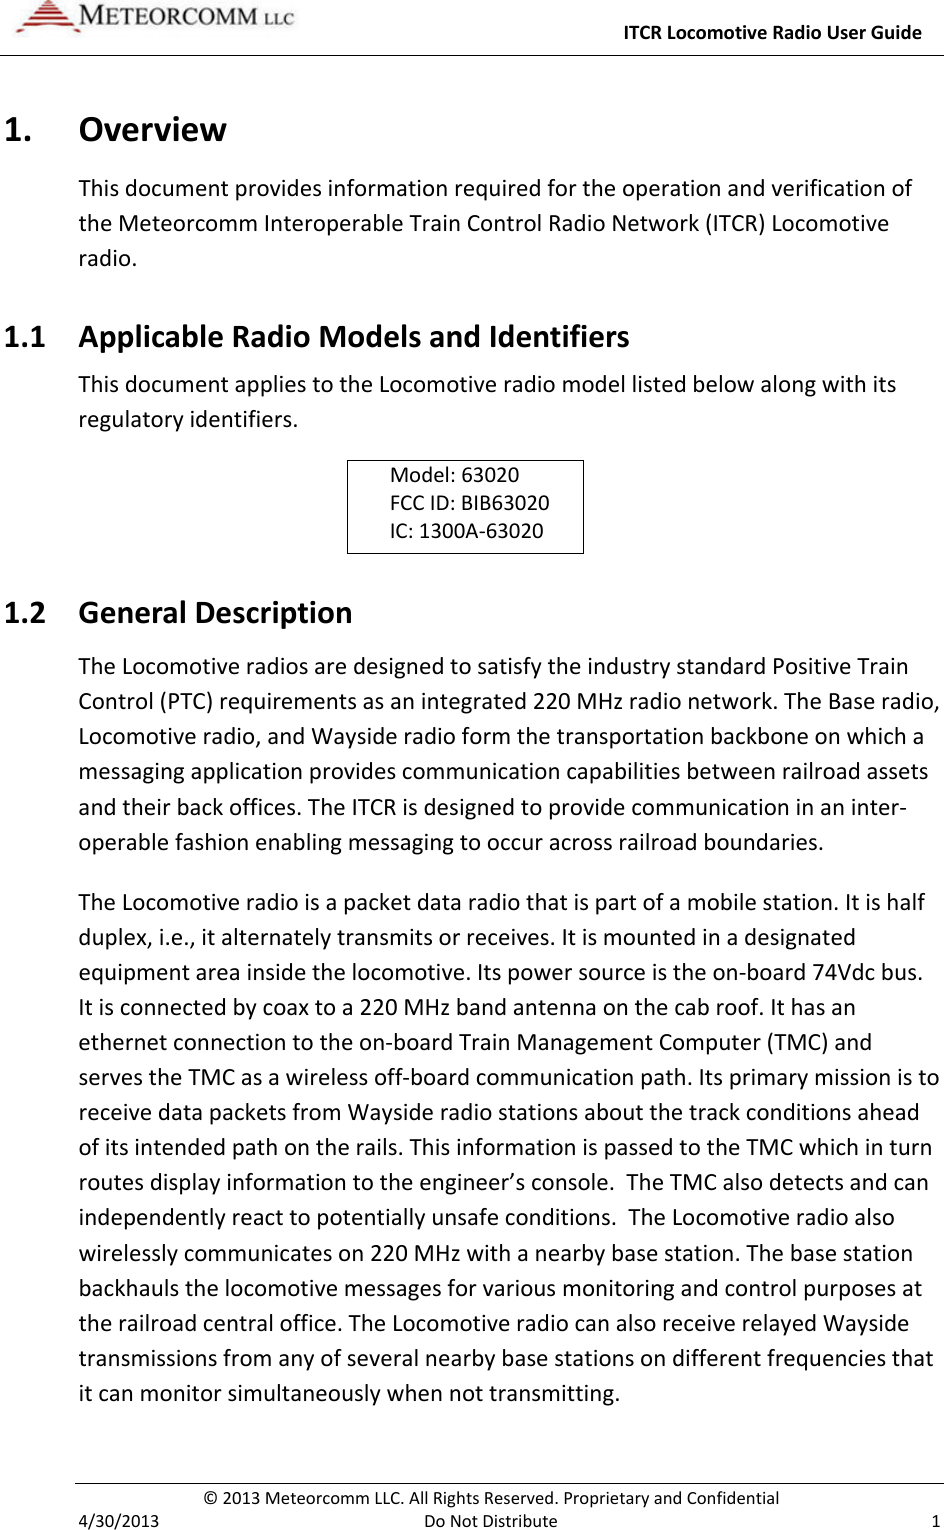     ITCR Locomotive Radio User Guide  © 2013 Meteorcomm LLC. All Rights Reserved. Proprietary and Confidential   4/30/2013  Do Not Distribute  1 1. Overview This document provides information required for the operation and verification of the Meteorcomm Interoperable Train Control Radio Network (ITCR) Locomotive radio. 1.1 Applicable Radio Models and Identifiers This document applies to the Locomotive radio model listed below along with its regulatory identifiers.  Model: 63020 FCC ID: BIB63020 IC: 1300A-63020 1.2 General Description The Locomotive radios are designed to satisfy the industry standard Positive Train Control (PTC) requirements as an integrated 220 MHz radio network. The Base radio, Locomotive radio, and Wayside radio form the transportation backbone on which a messaging application provides communication capabilities between railroad assets and their back offices. The ITCR is designed to provide communication in an inter-operable fashion enabling messaging to occur across railroad boundaries.  The Locomotive radio is a packet data radio that is part of a mobile station. It is half duplex, i.e., it alternately transmits or receives. It is mounted in a designated equipment area inside the locomotive. Its power source is the on-board 74Vdc bus. It is connected by coax to a 220 MHz band antenna on the cab roof. It has an ethernet connection to the on-board Train Management Computer (TMC) and serves the TMC as a wireless off-board communication path. Its primary mission is to receive data packets from Wayside radio stations about the track conditions ahead of its intended path on the rails. This information is passed to the TMC which in turn routes display information to the engineer’s console.  The TMC also detects and can independently react to potentially unsafe conditions.  The Locomotive radio also wirelessly communicates on 220 MHz with a nearby base station. The base station backhauls the locomotive messages for various monitoring and control purposes at the railroad central office. The Locomotive radio can also receive relayed Wayside transmissions from any of several nearby base stations on different frequencies that it can monitor simultaneously when not transmitting. 